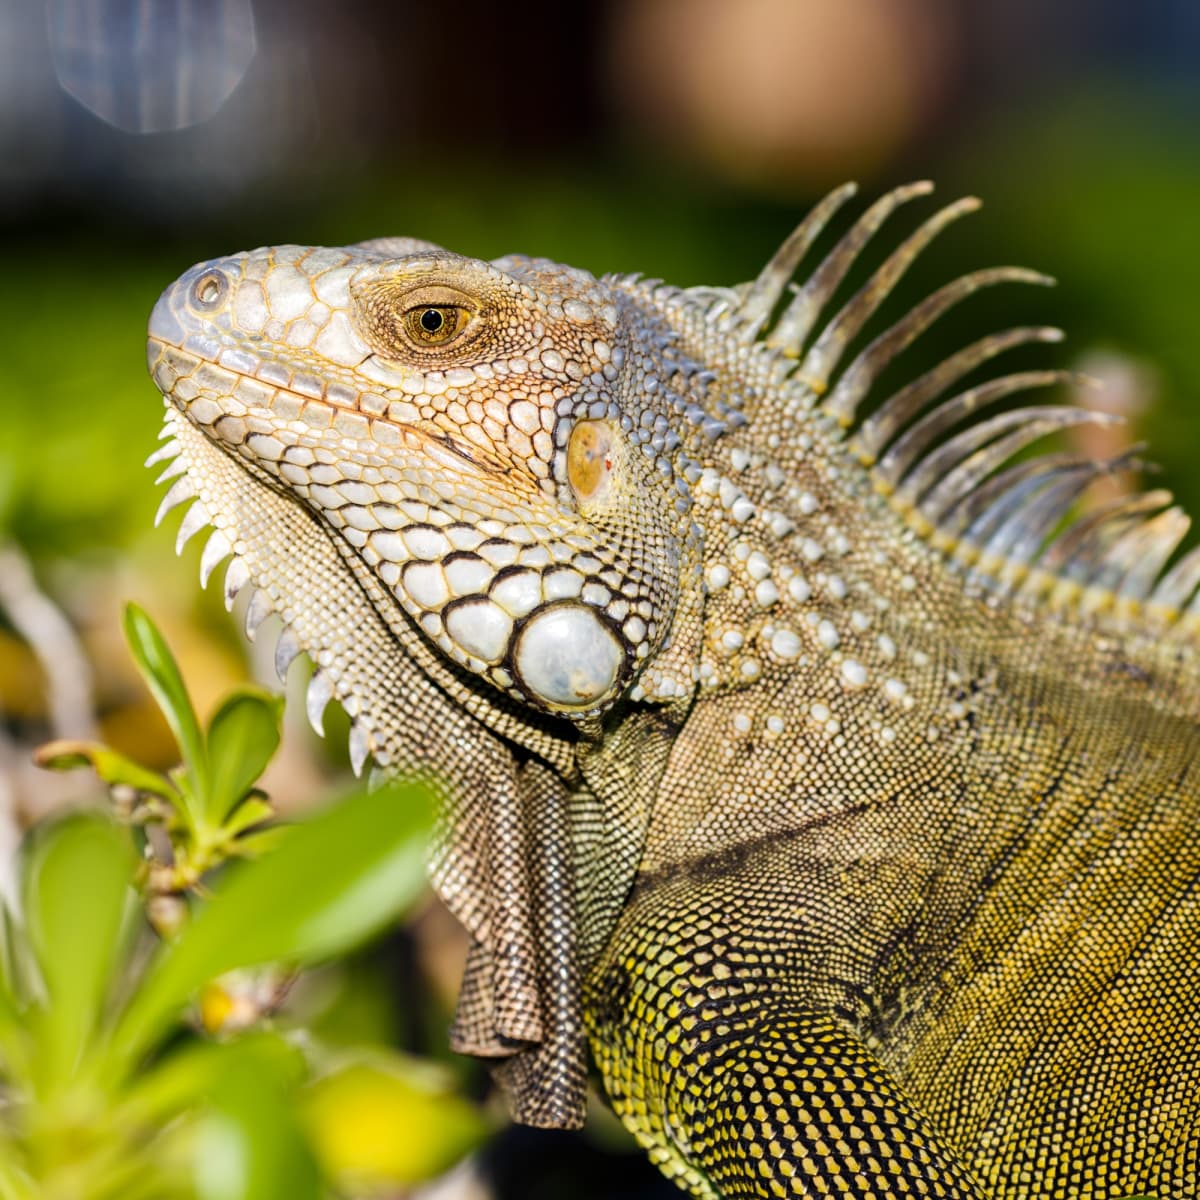 10 Pet Lizards That Don't Need to Eat Live Food - PetHelpful